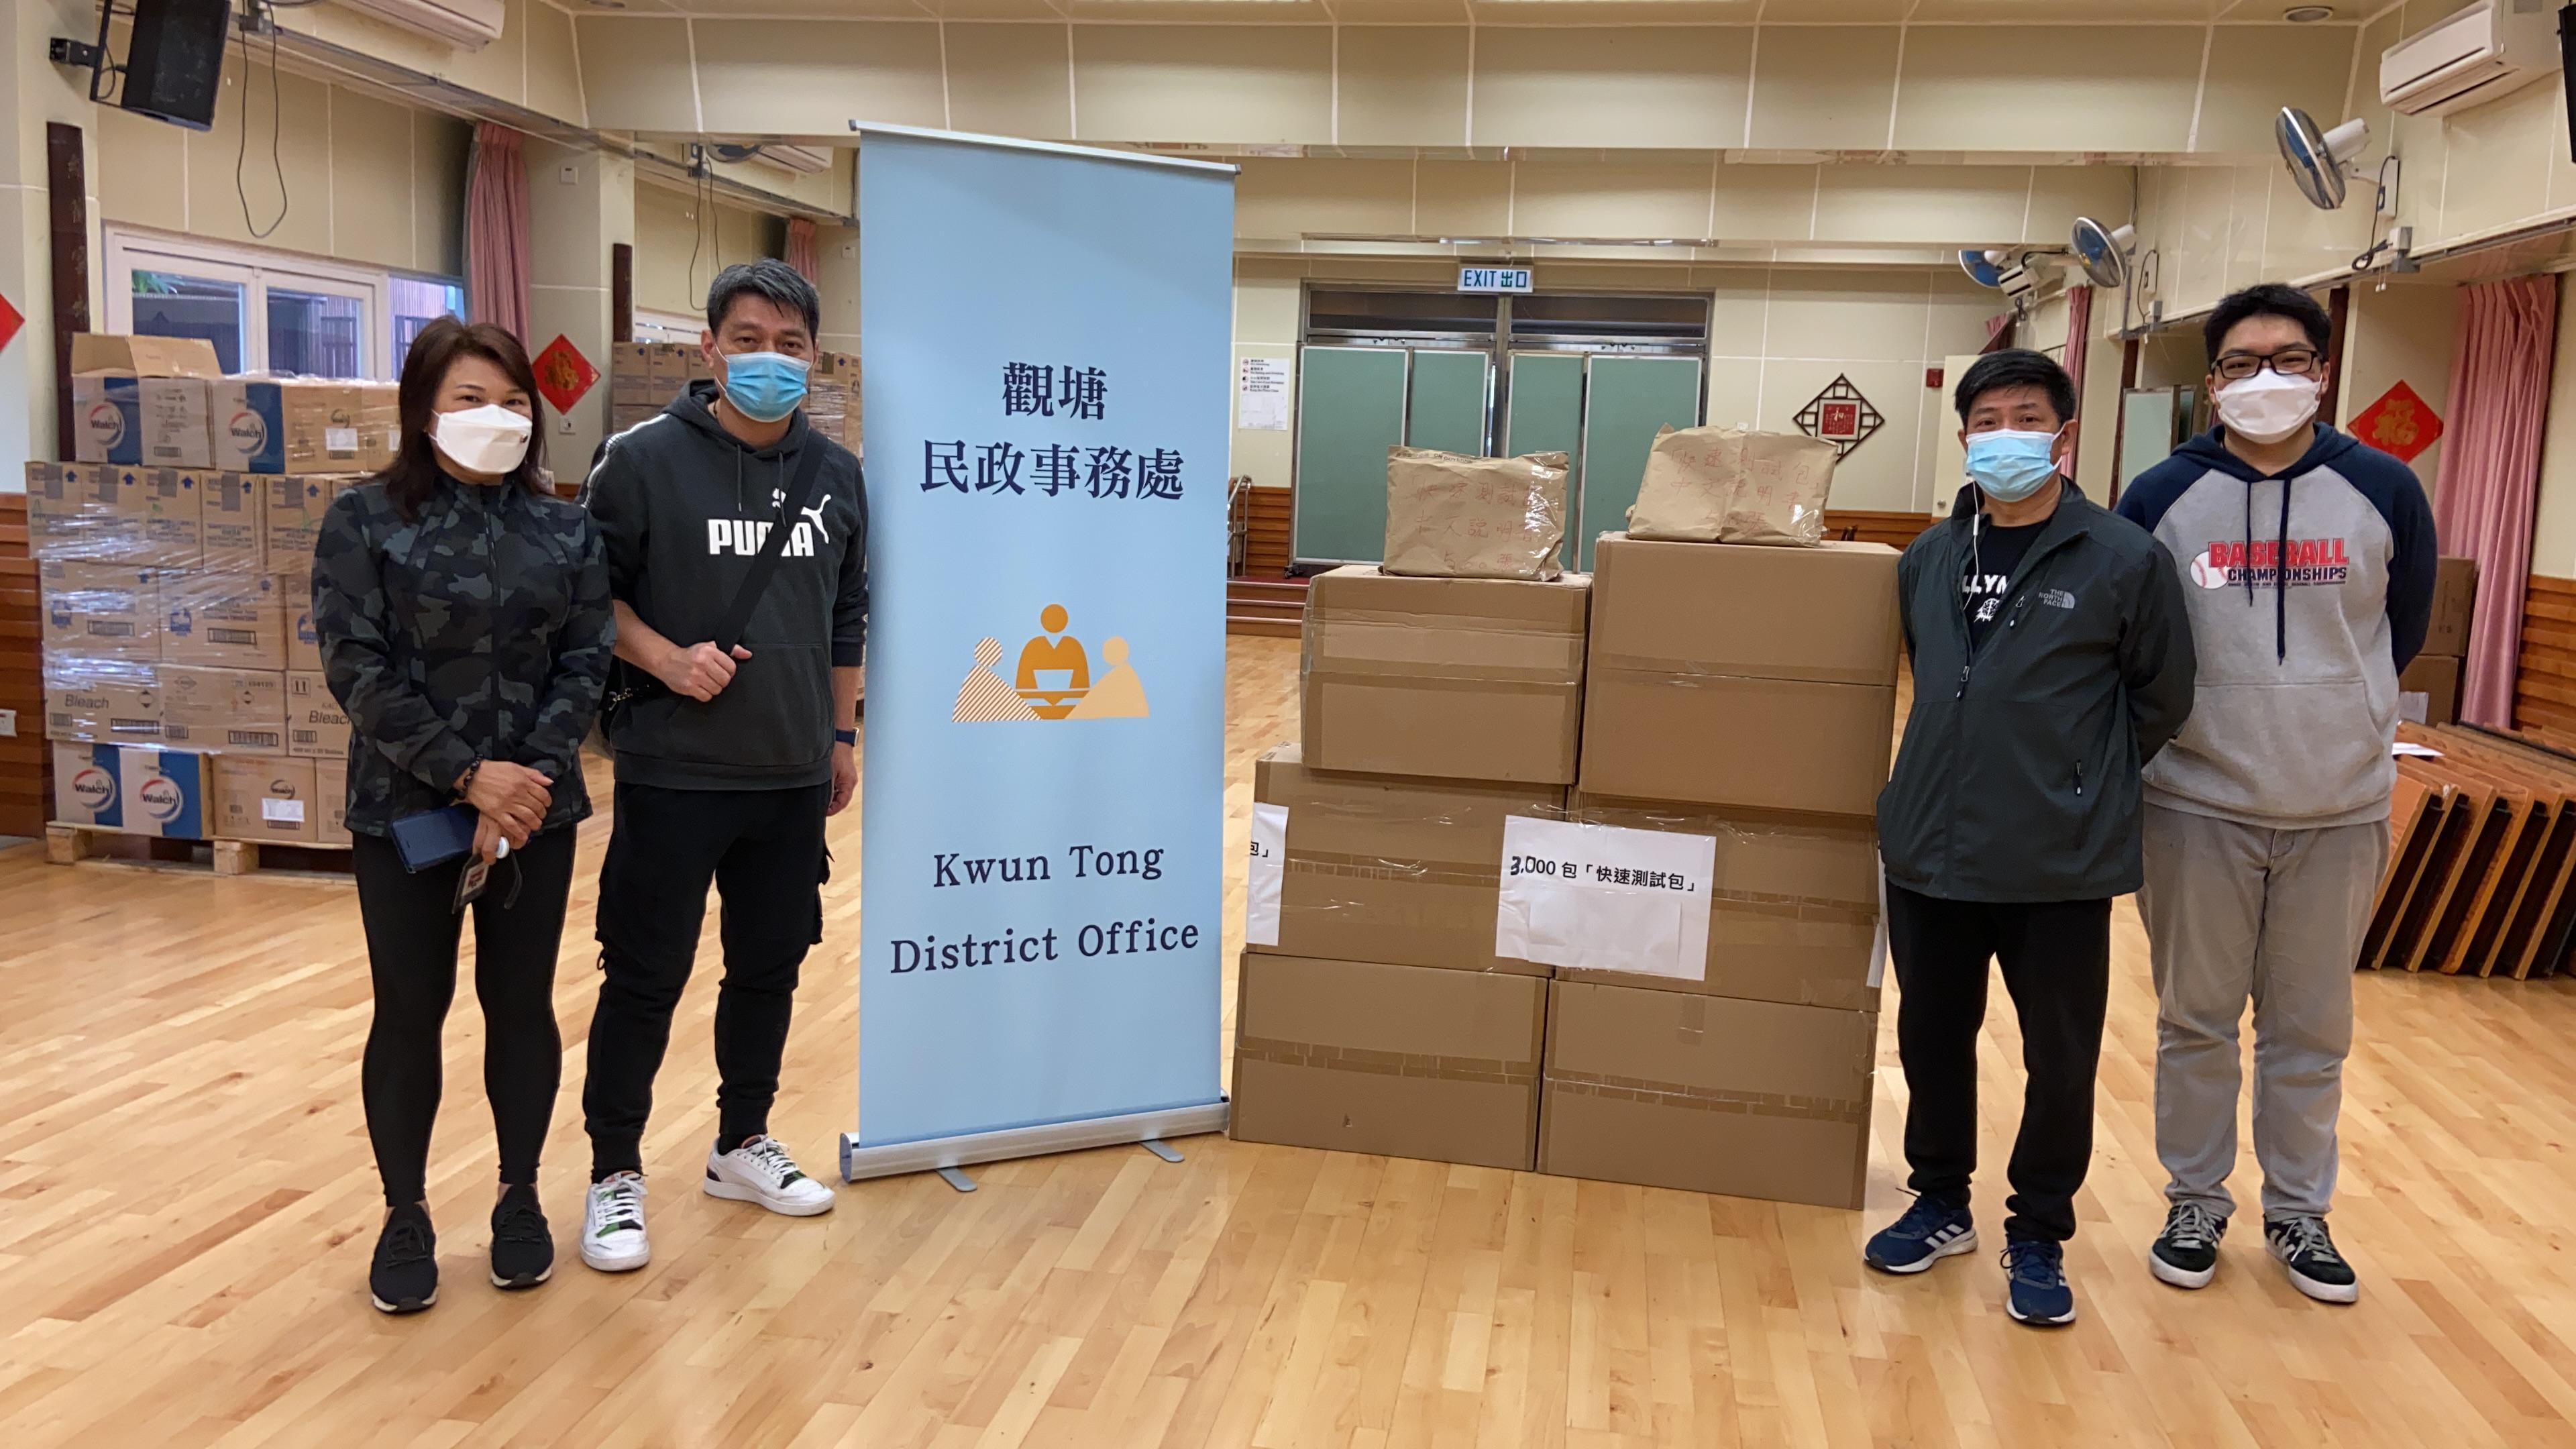 The Kwun Tong District Office today (February 12) distributed rapid test kits to households, cleansing workers and property management staff living and working in Block 1 and Block 2 of Sau Mau Ping Disciplined Services Quarters for voluntary testing through the property management company.